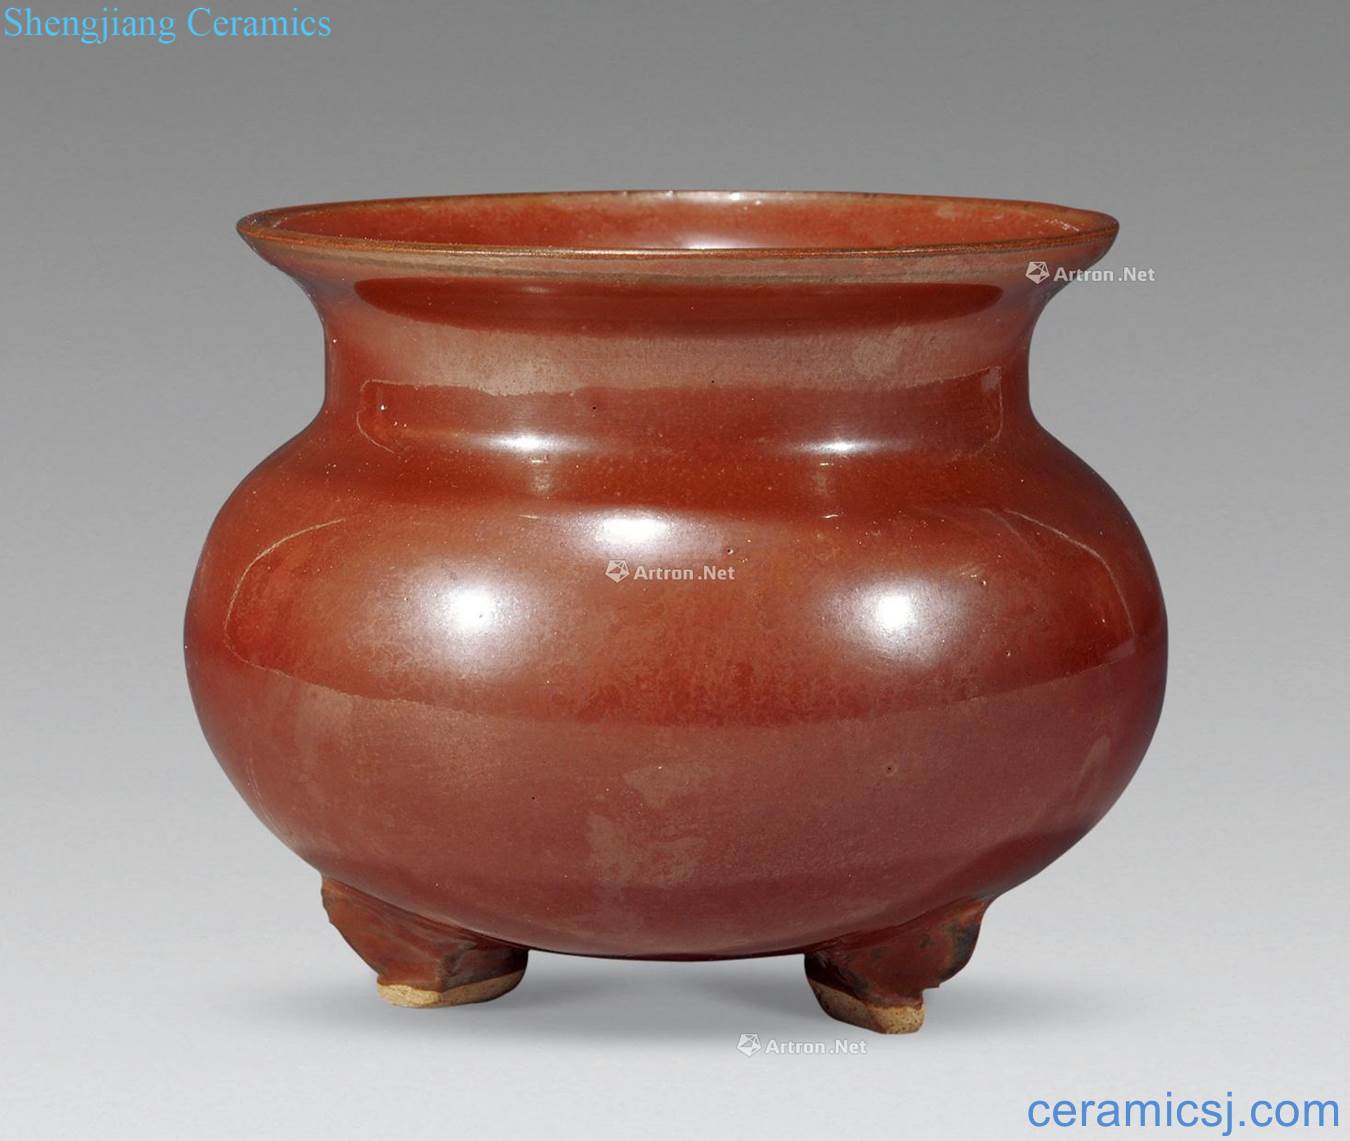 Song persimmon glaze by furnace